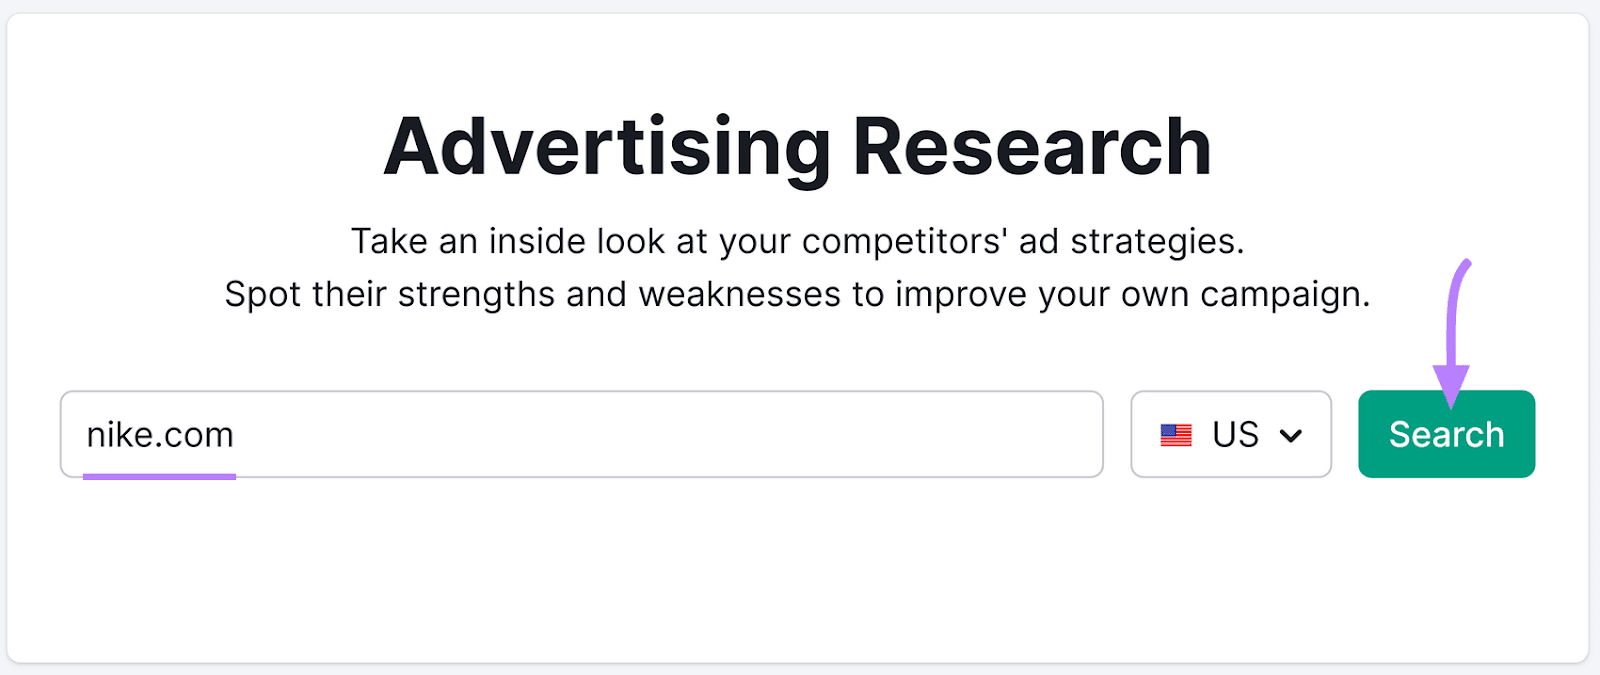 "nike.com" entered into the Advertising Research instrumentality   hunt  bar